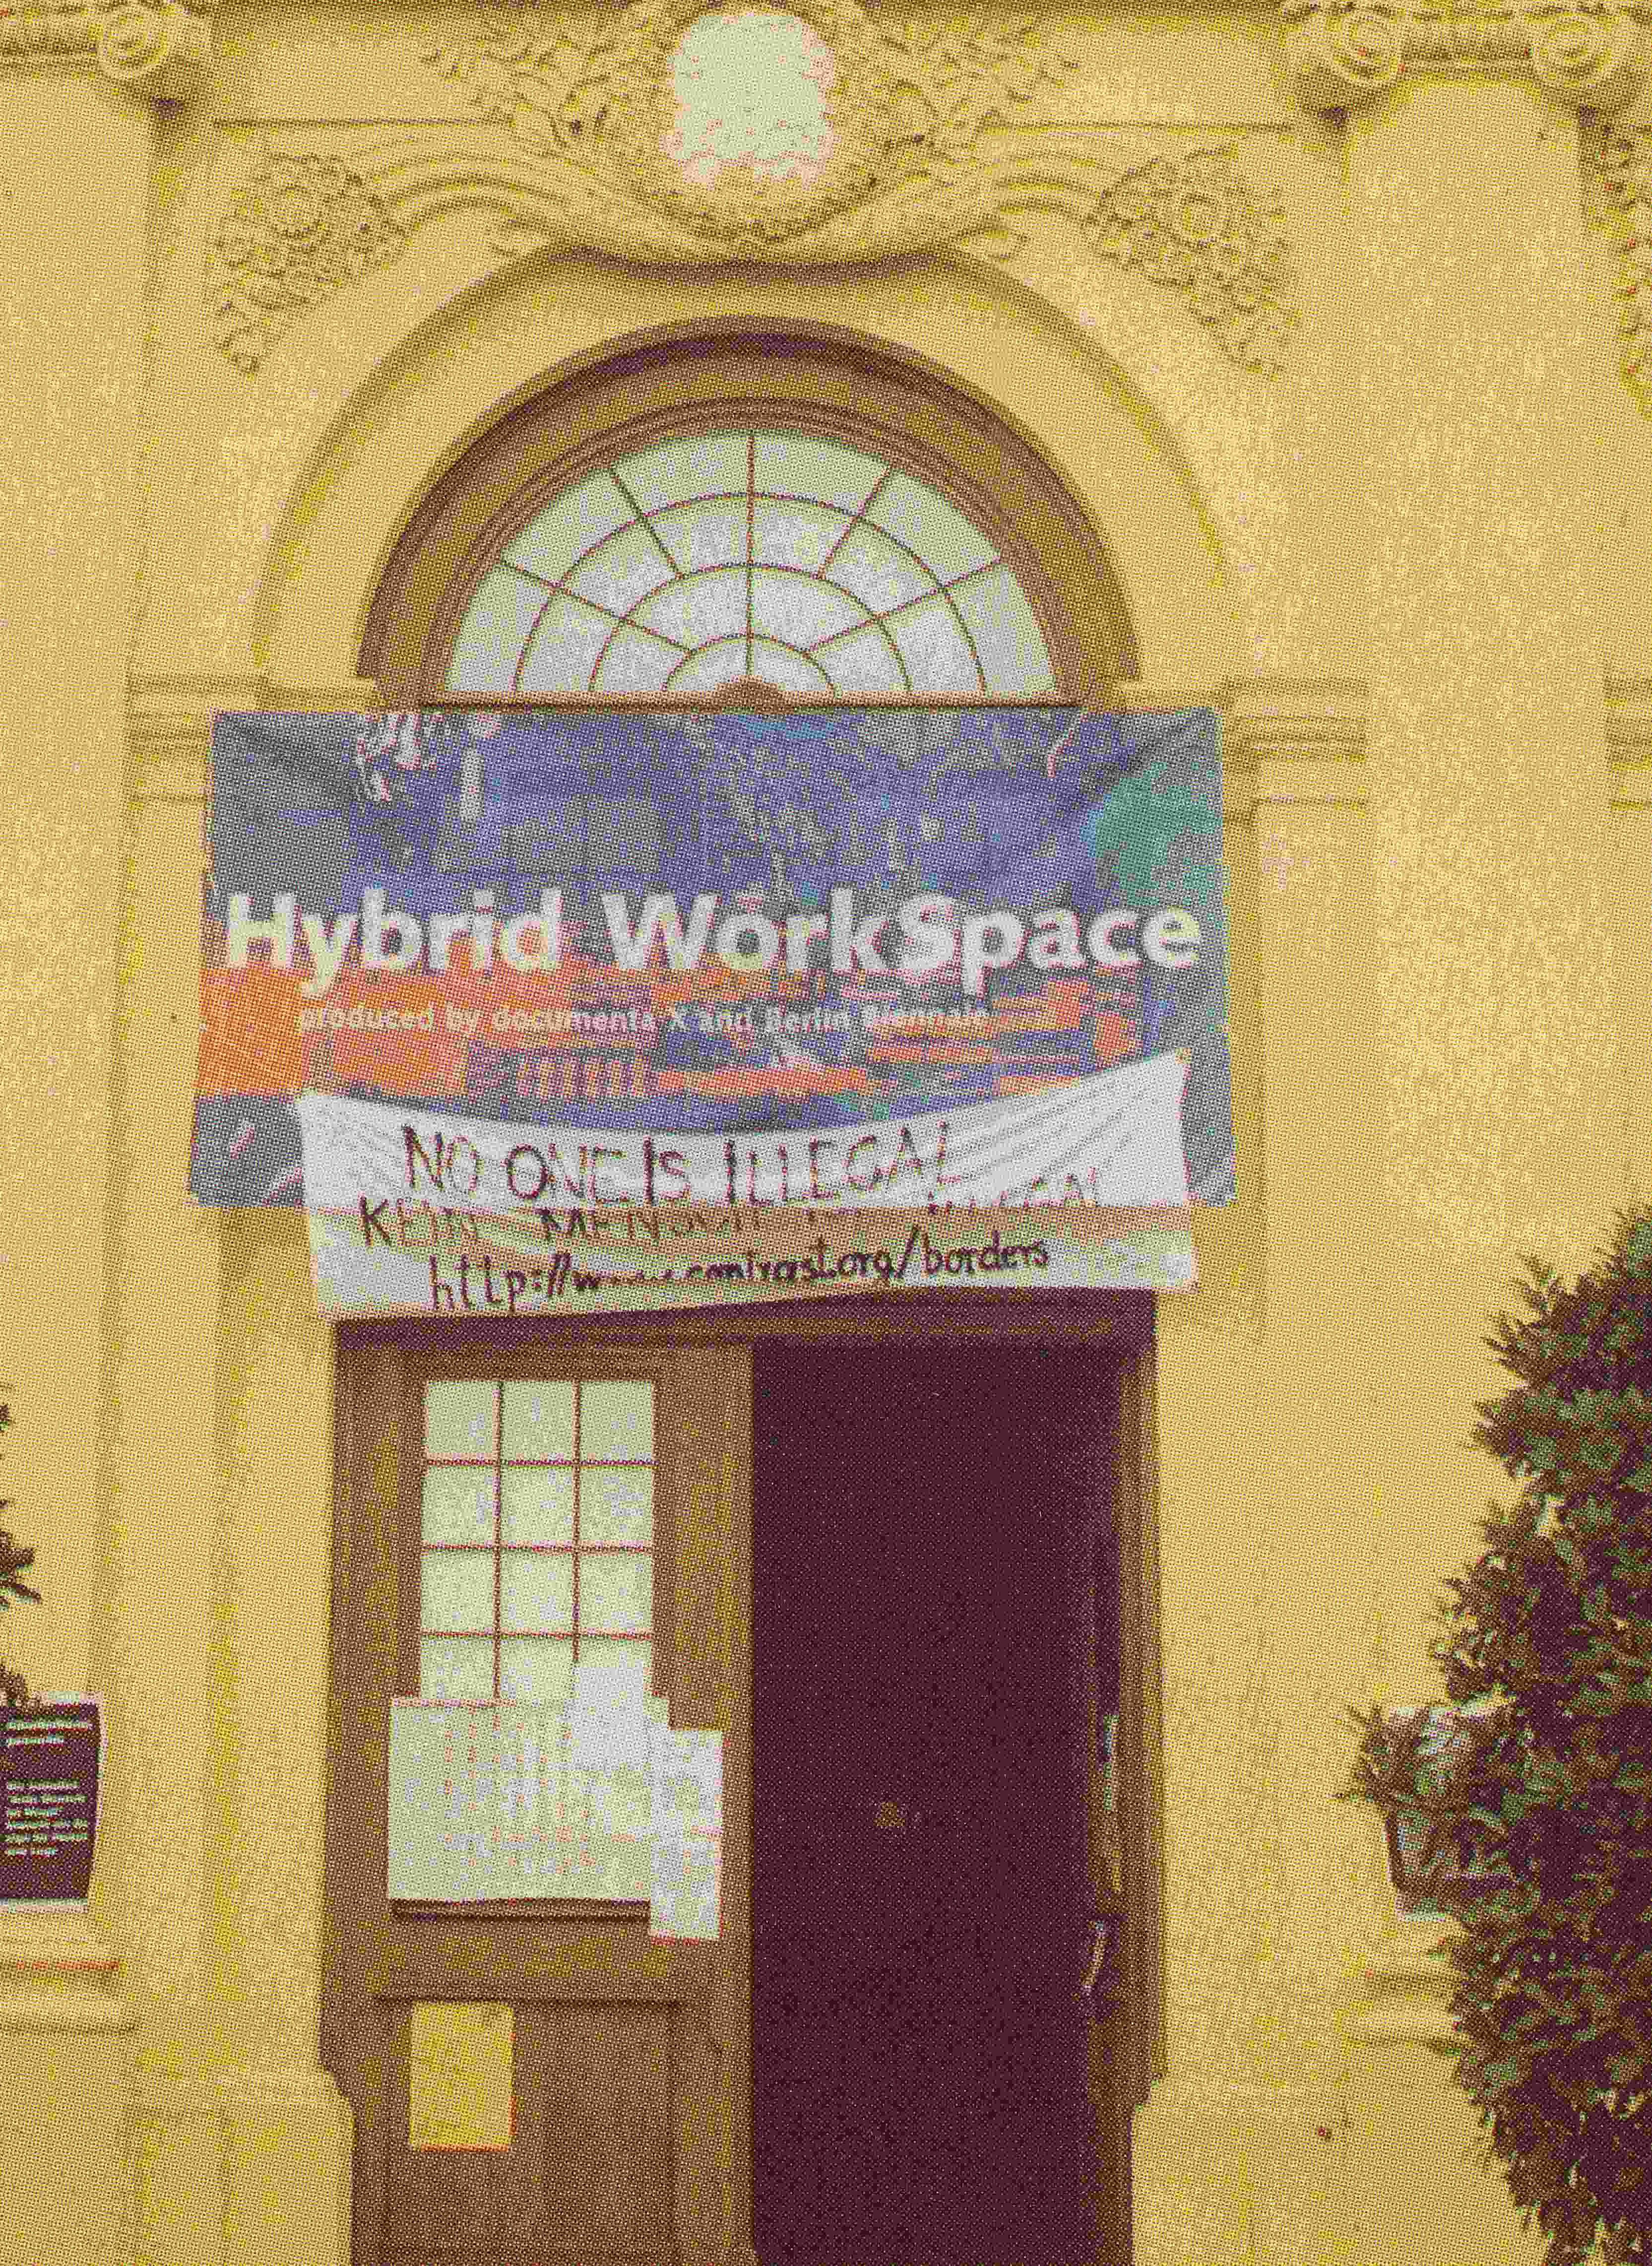  No One Is Illegal: Start at Hyprid Workspace of documenta X, Kassel 1997